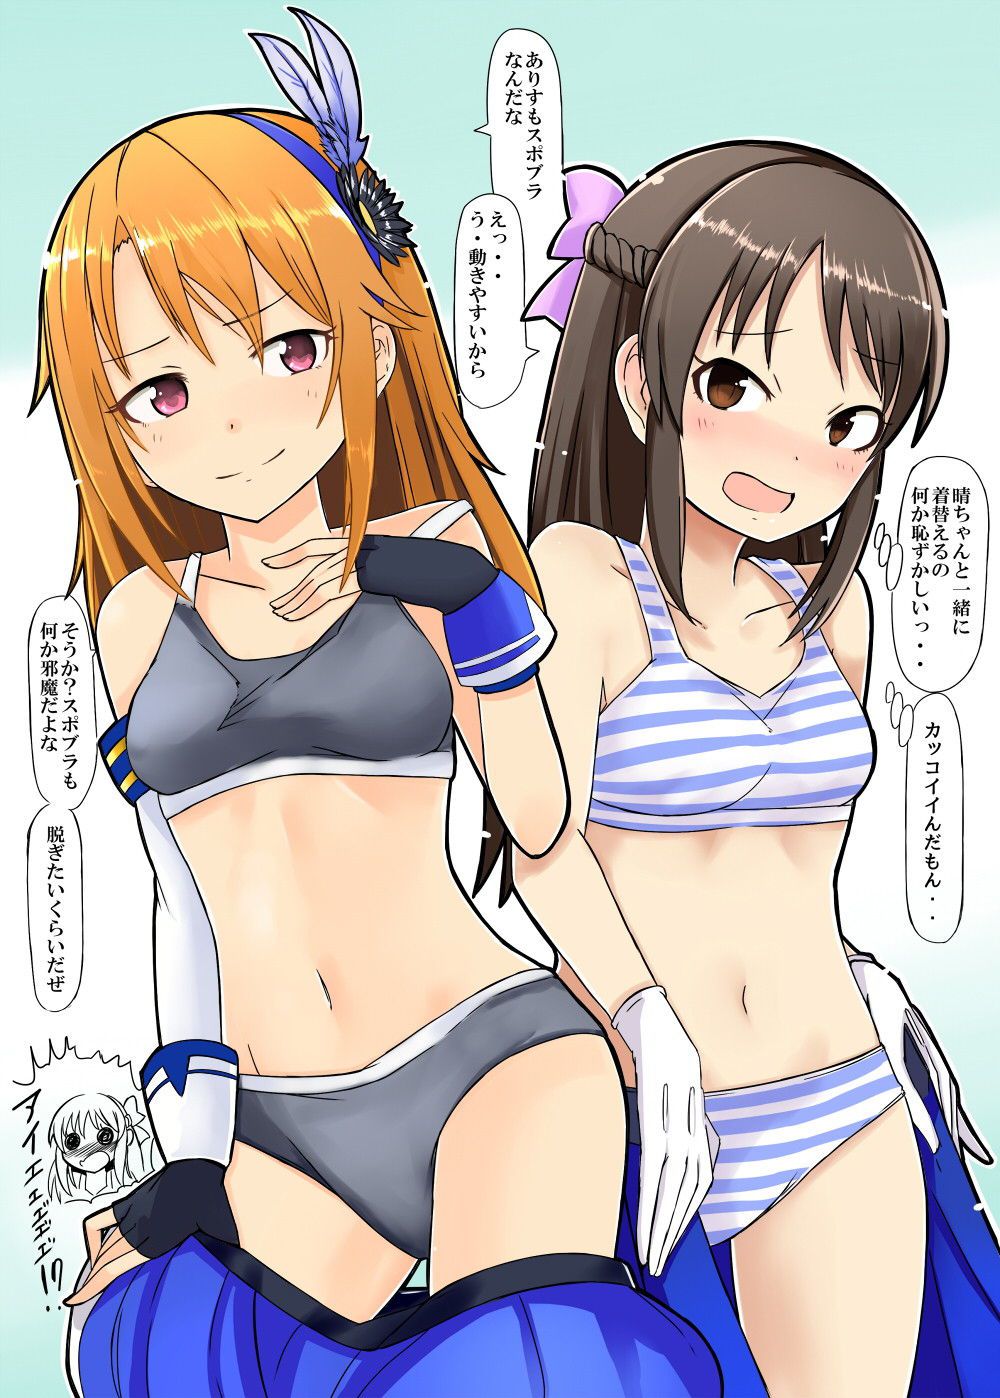 [39 pieces] I take an eroticism image having a cute the youth shorts & youth bra which is suitable for age of ガチ primary schoolchild Lolly Arisu Tachibana of デレマス! 18